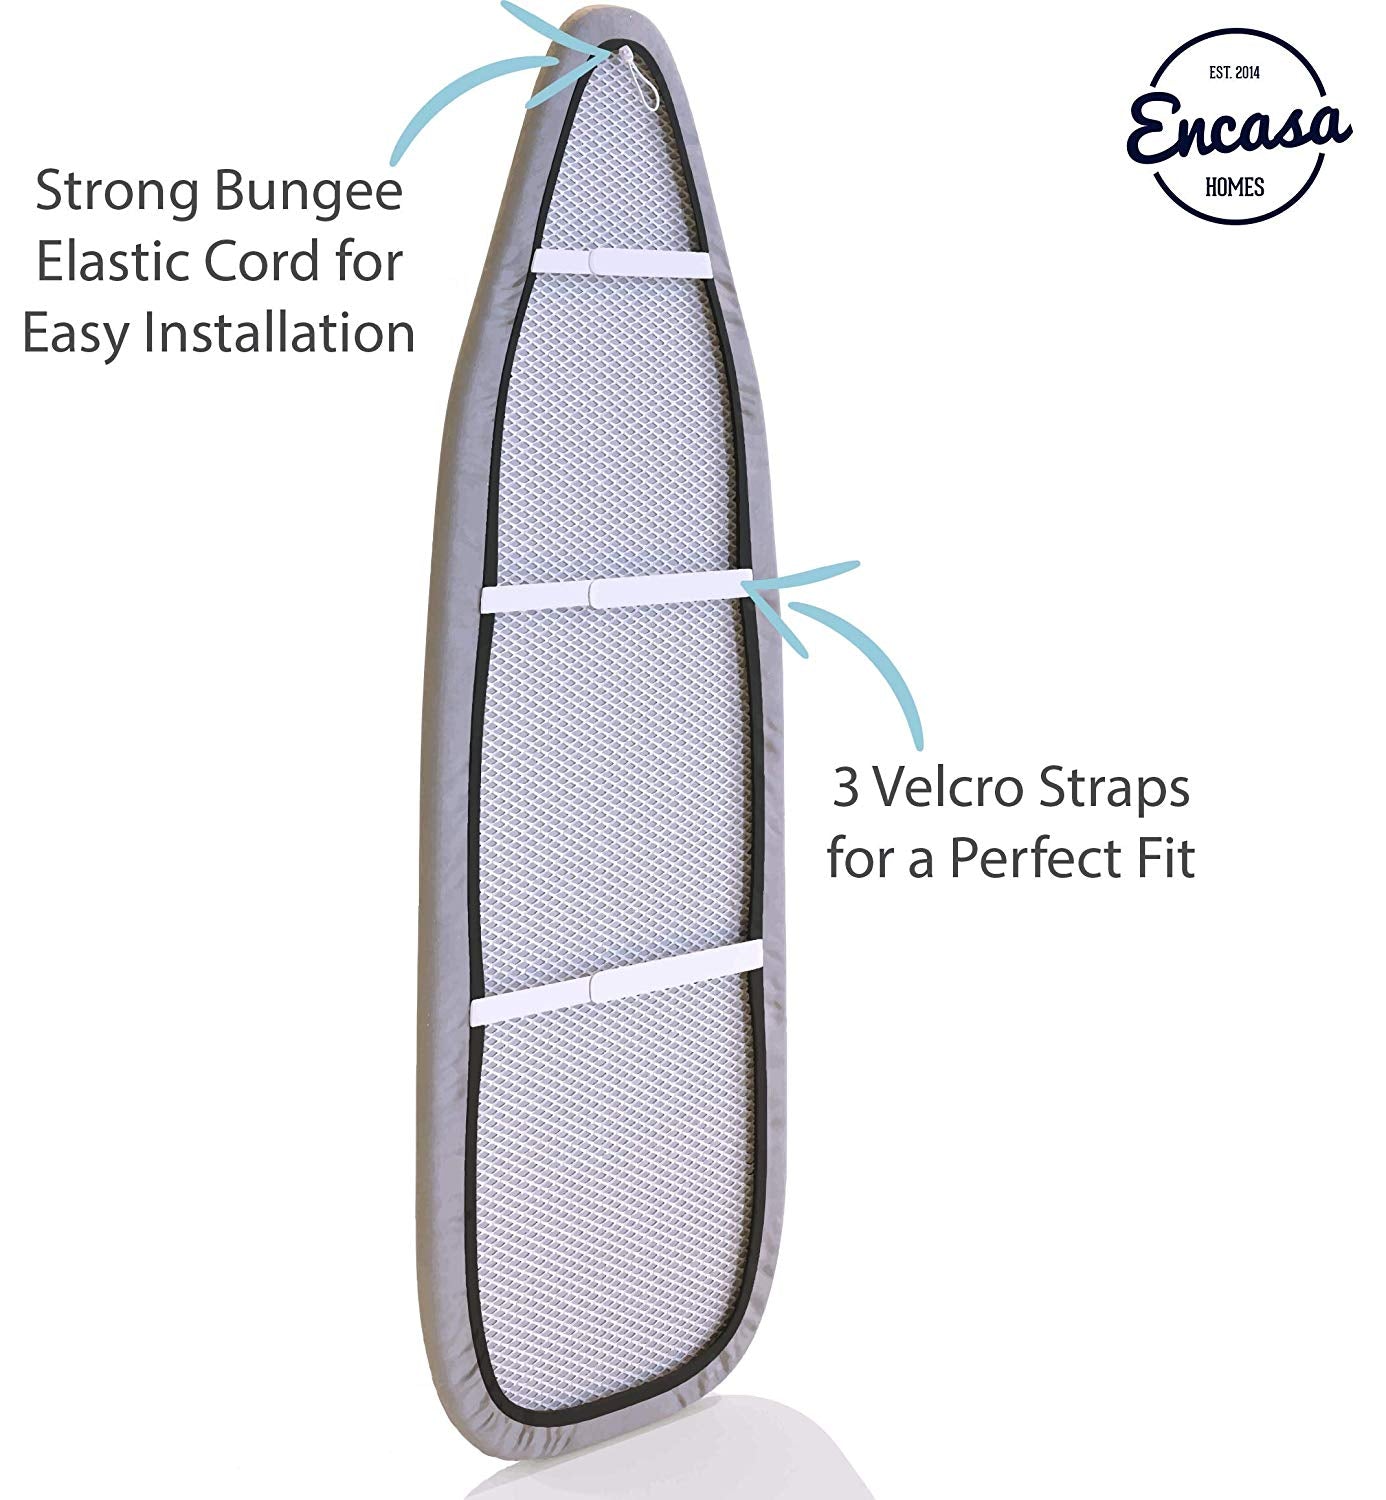 Encasa Homes Metallised Ironing Board Cover 'Silver Super Luxury' with Foam + Felt PAD (Fits Standard Wide Boards "18x49") Heat Reflective, Scorch Resistant, Bungee Elasticated, 3 Velcro Fasteners